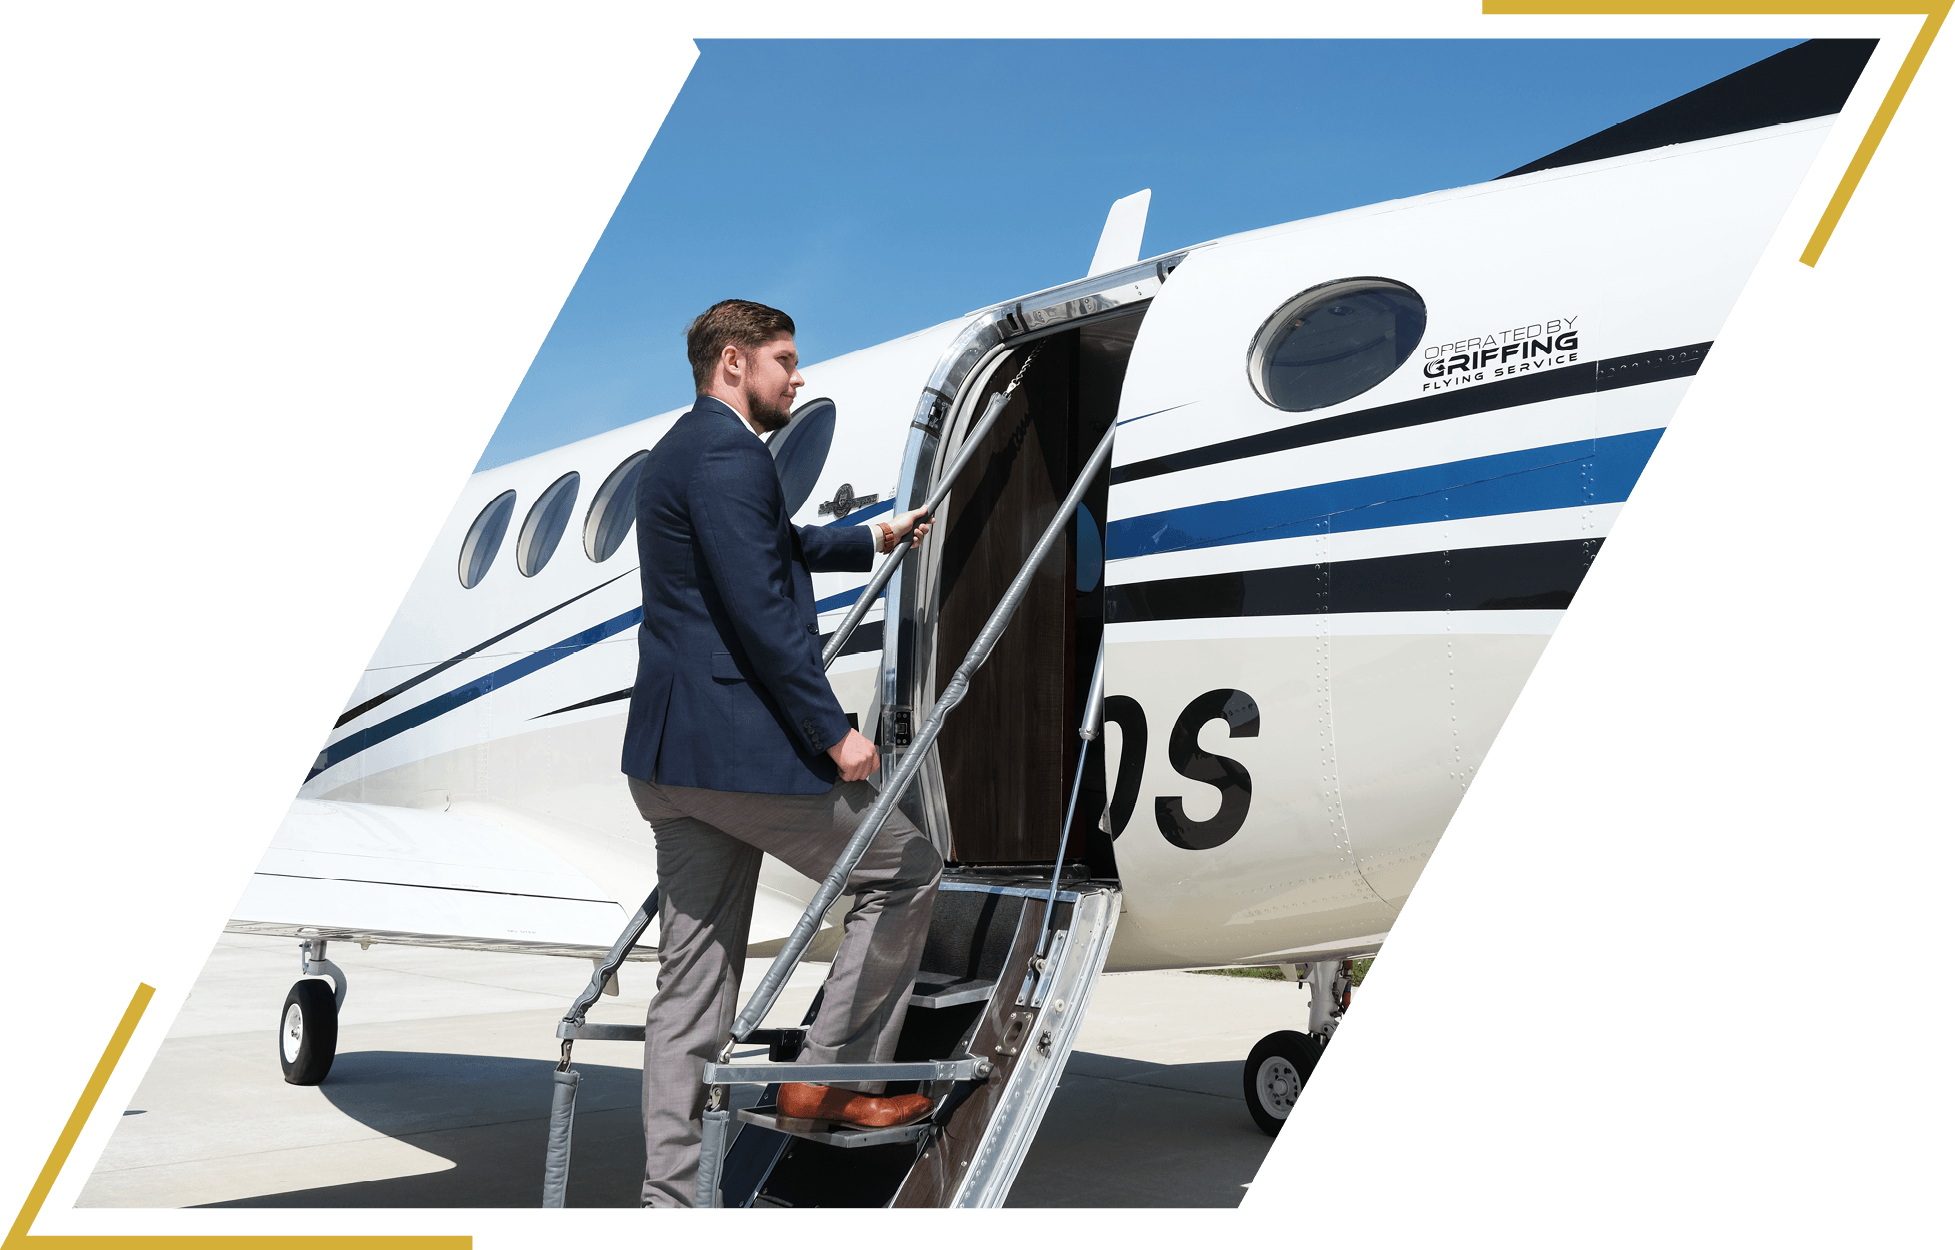 With a Griffing Flying Service private jet, you can set your own schedule and avoid the long check-in and security lines at commercial airports, allowing you to save valuable time and avoid stress.